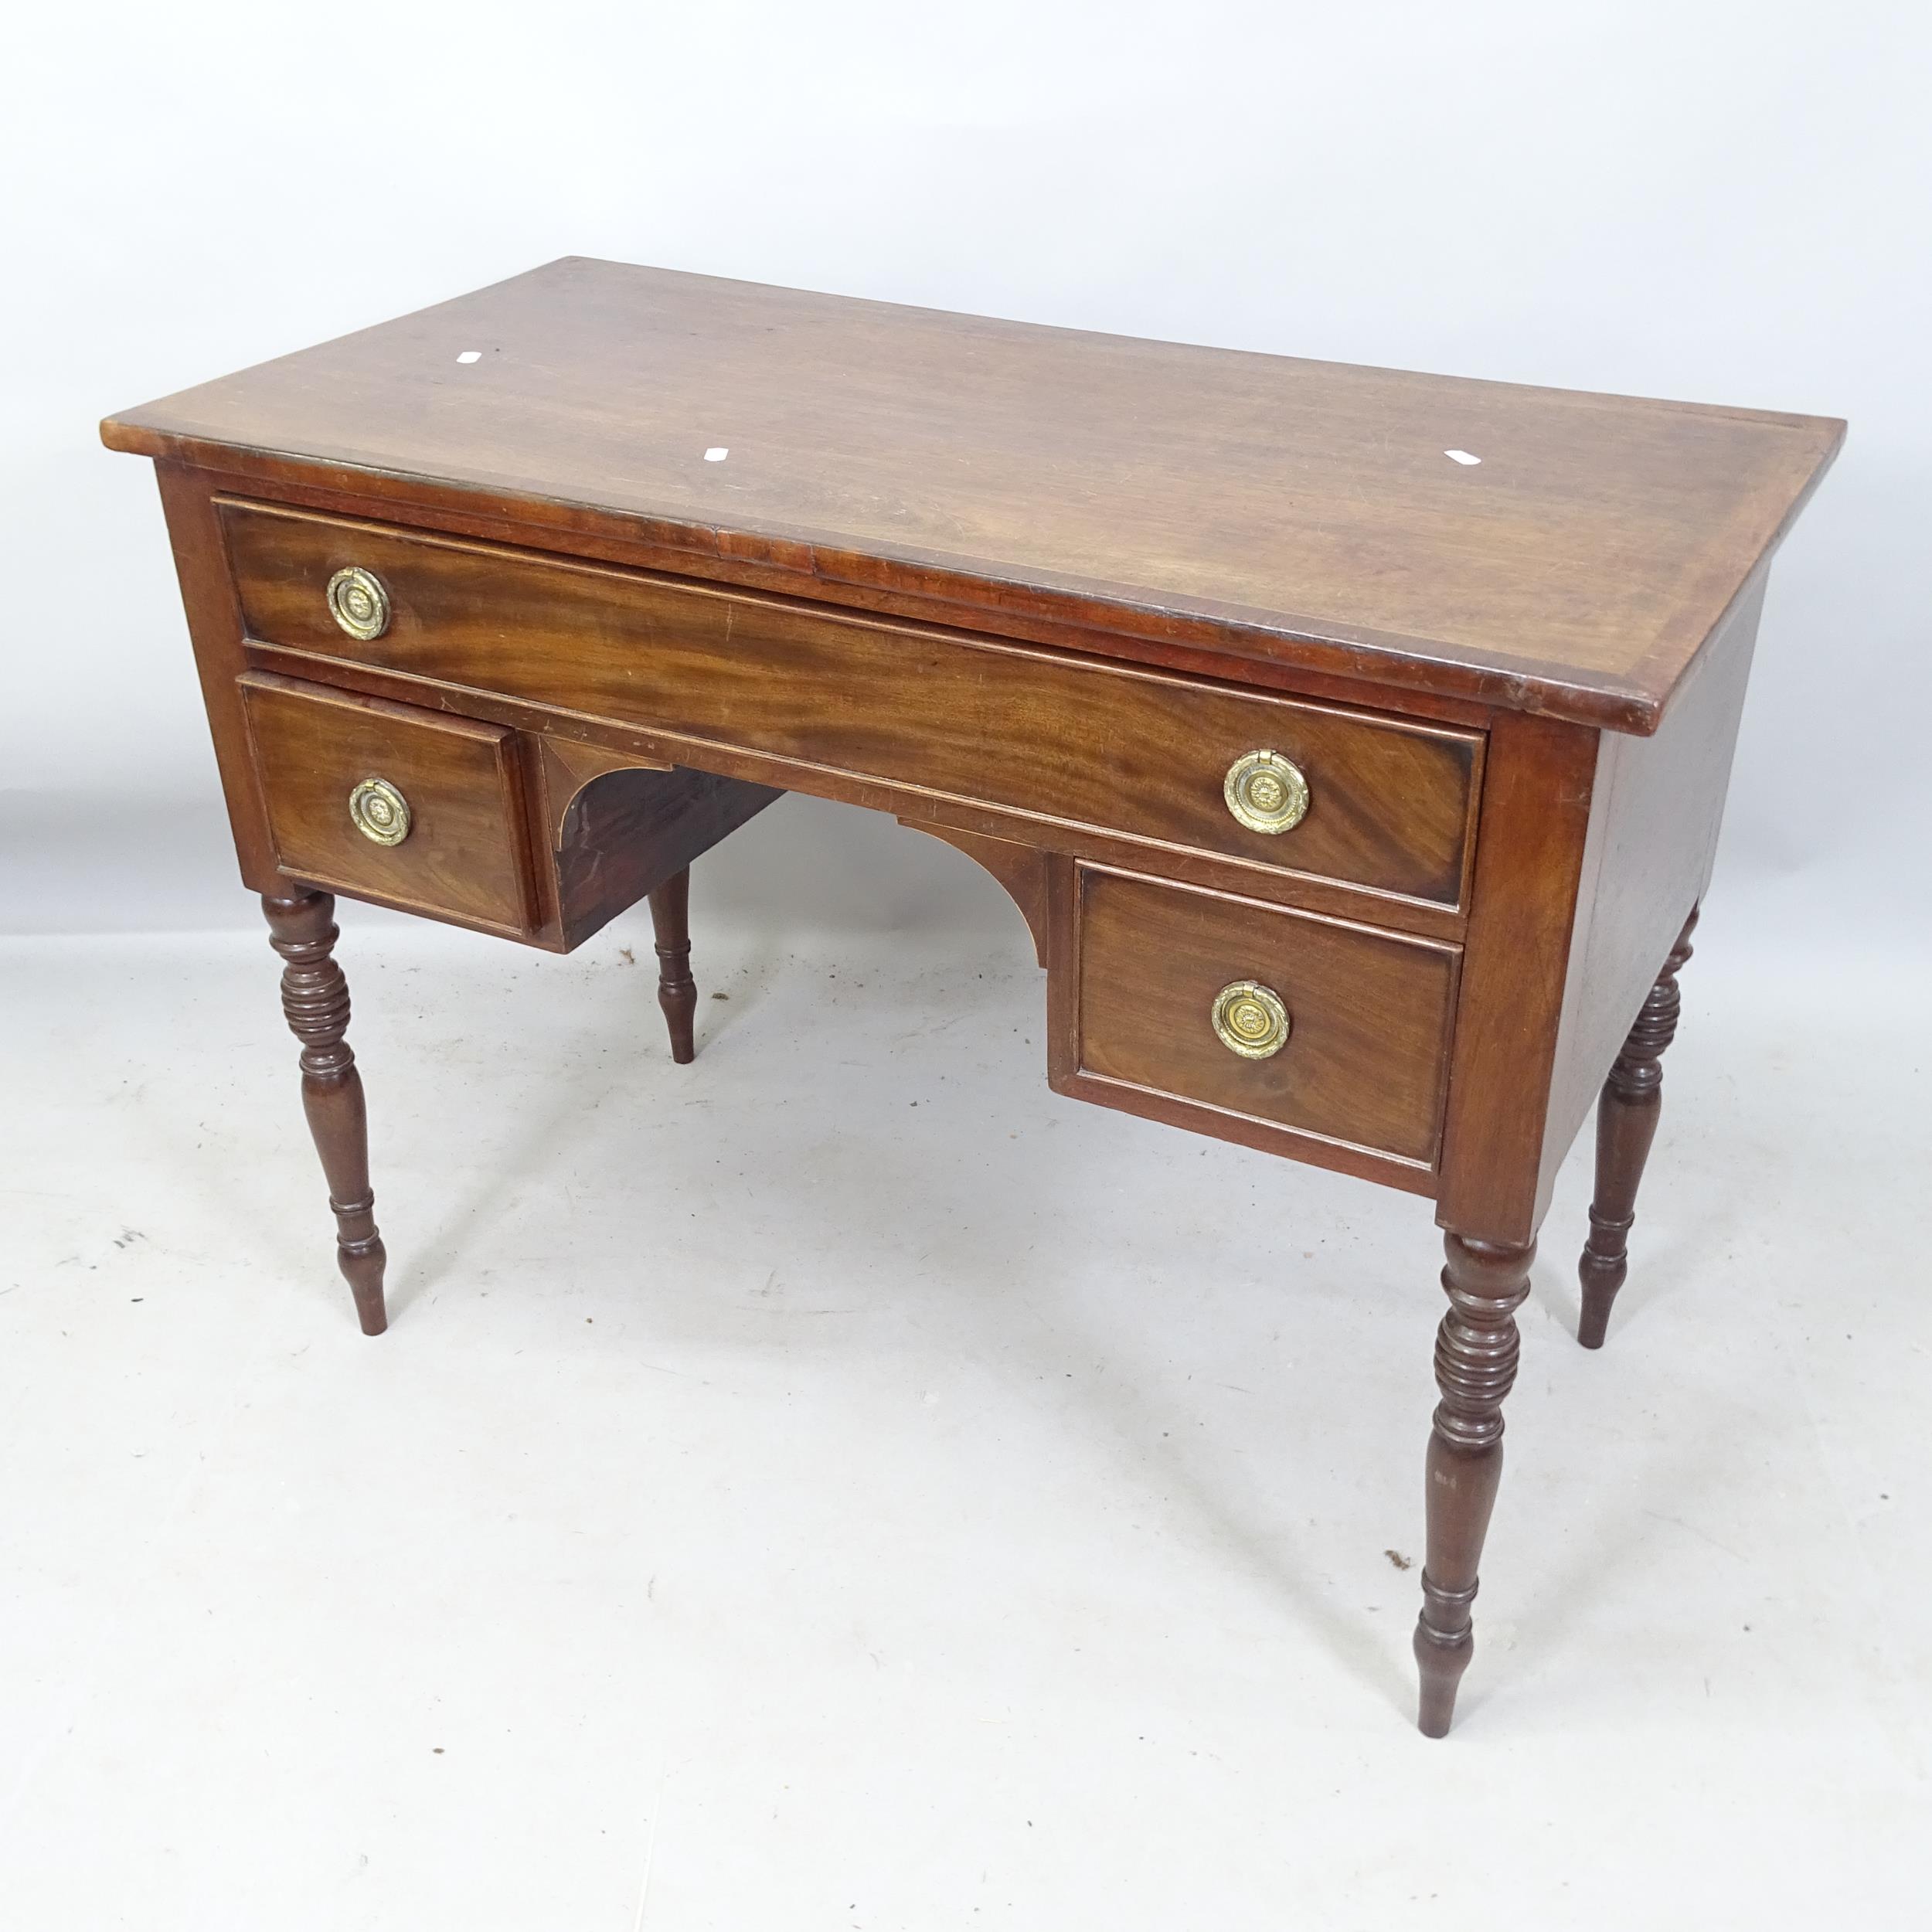 An Antique mahogany and satinwood-strung lady's kneehole writing desk, with 3 fitted drawers, on